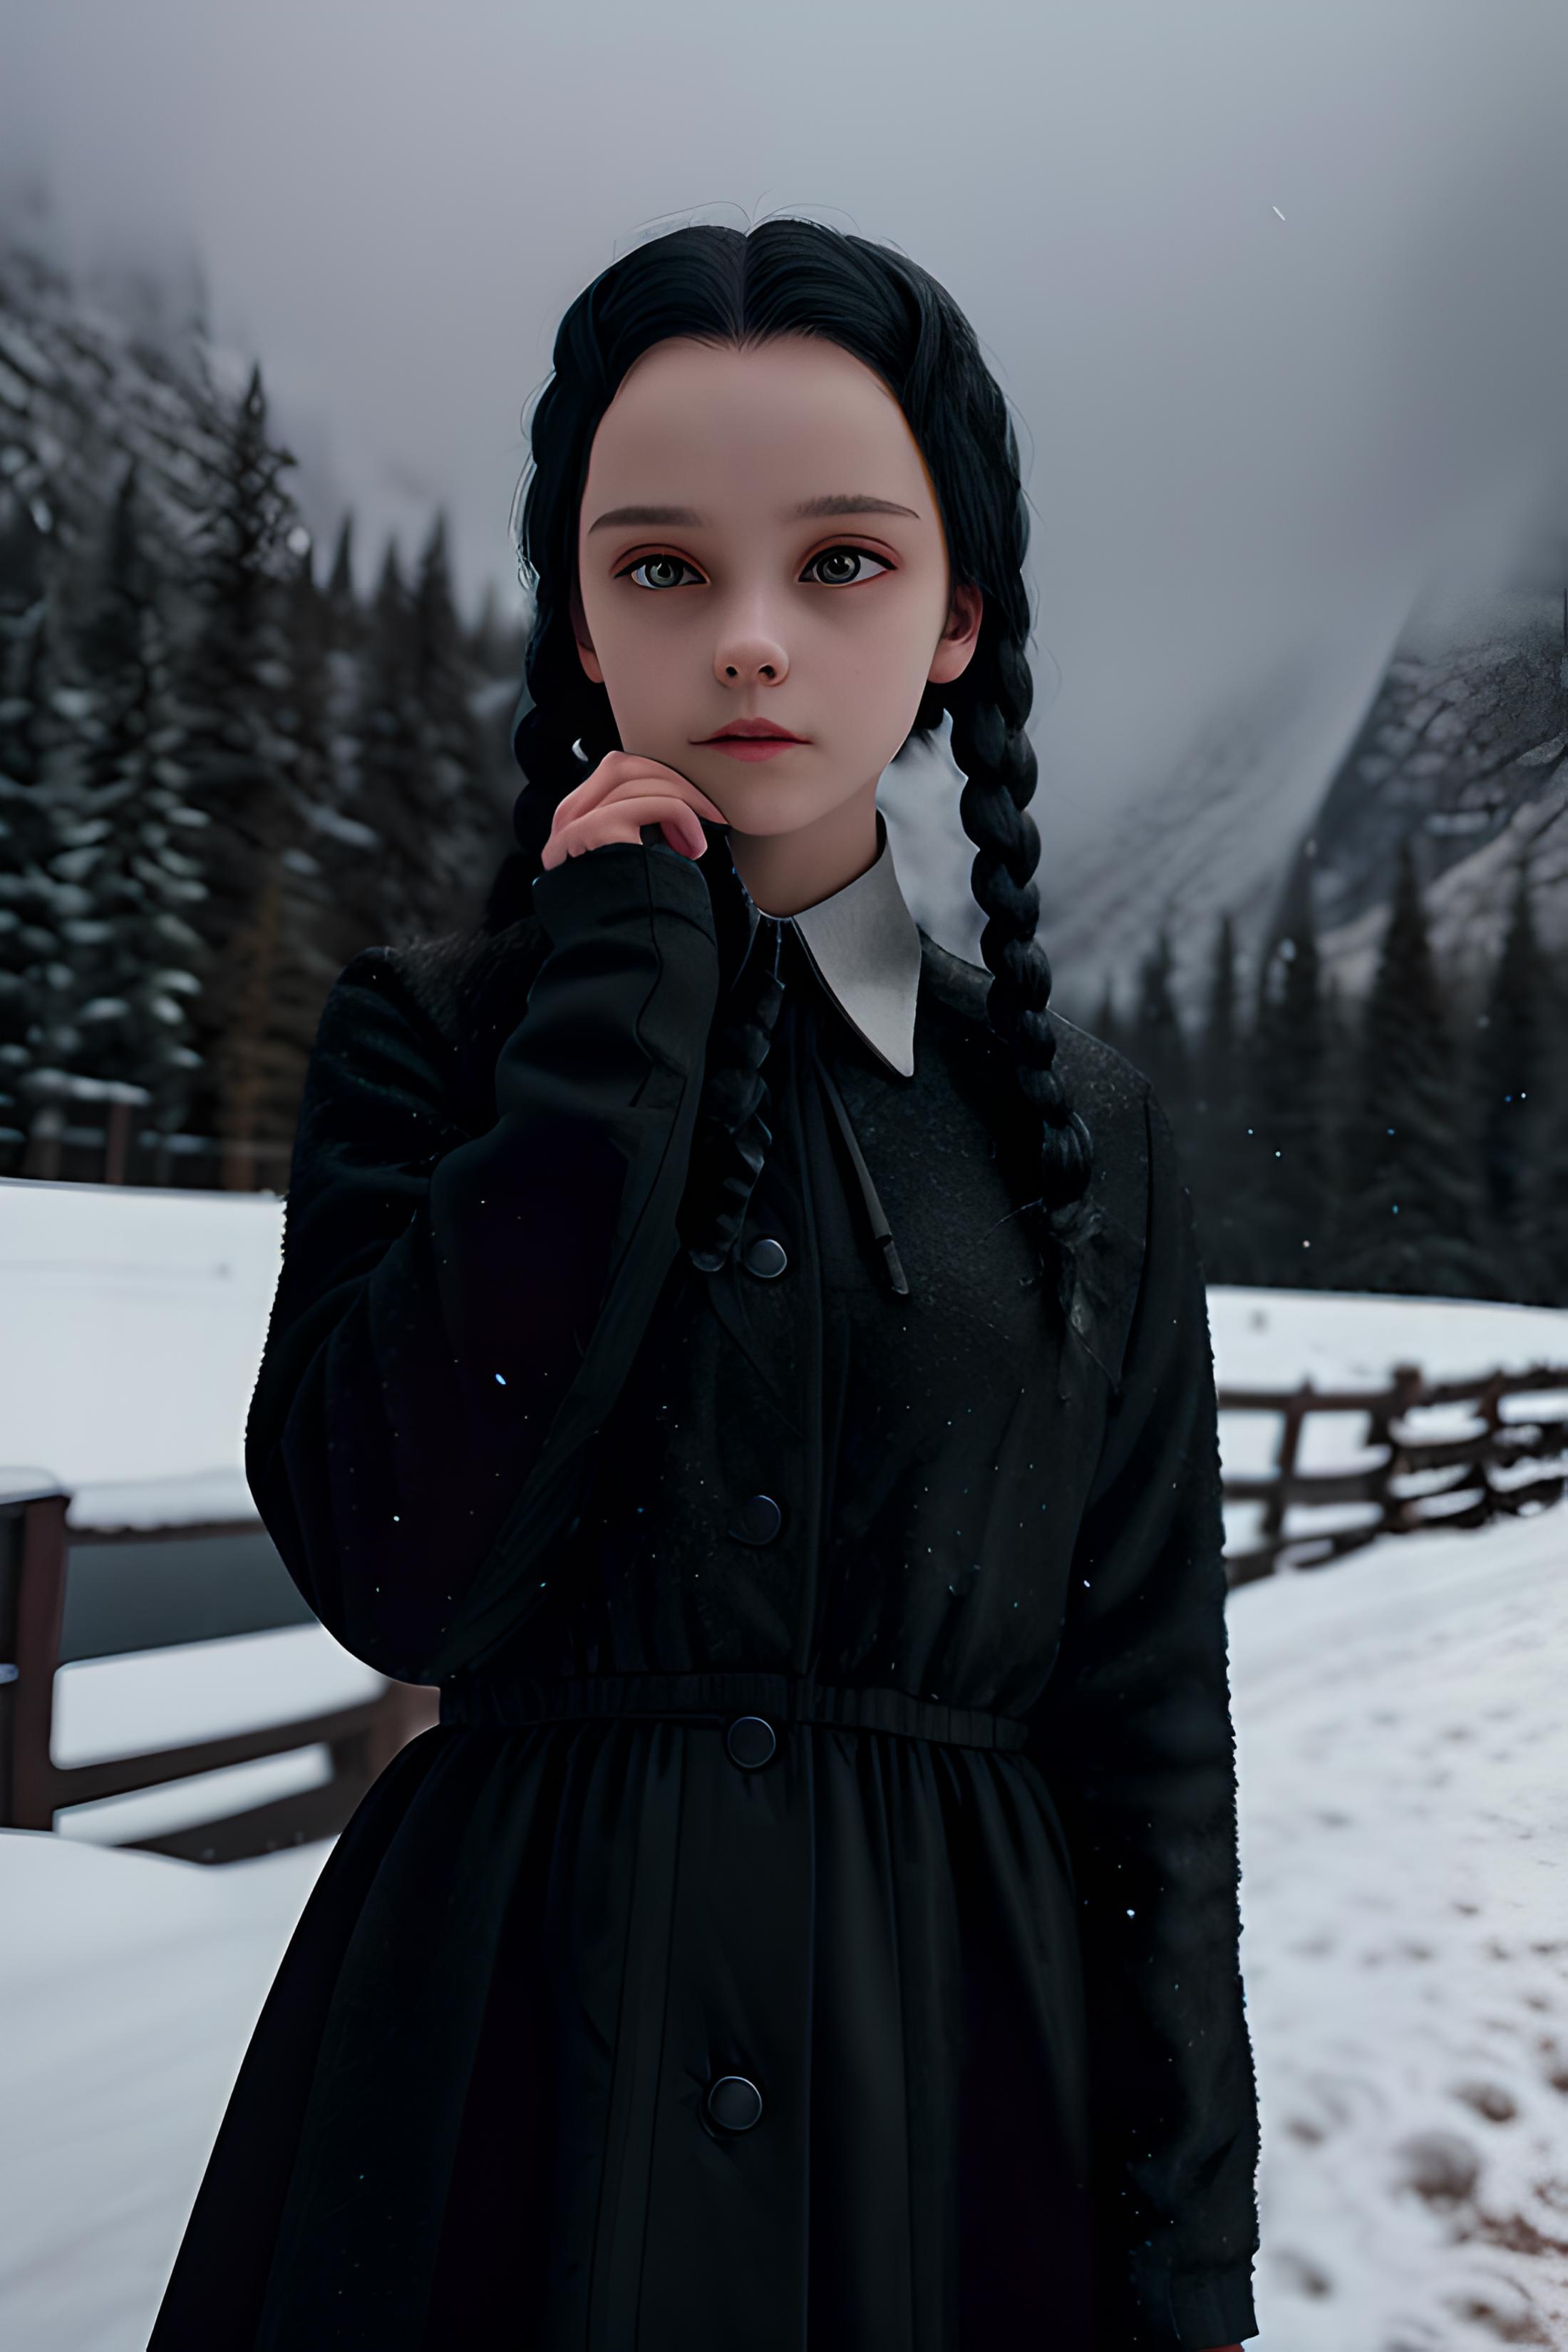 Wednesday Addams | 1990's image by Fussioner